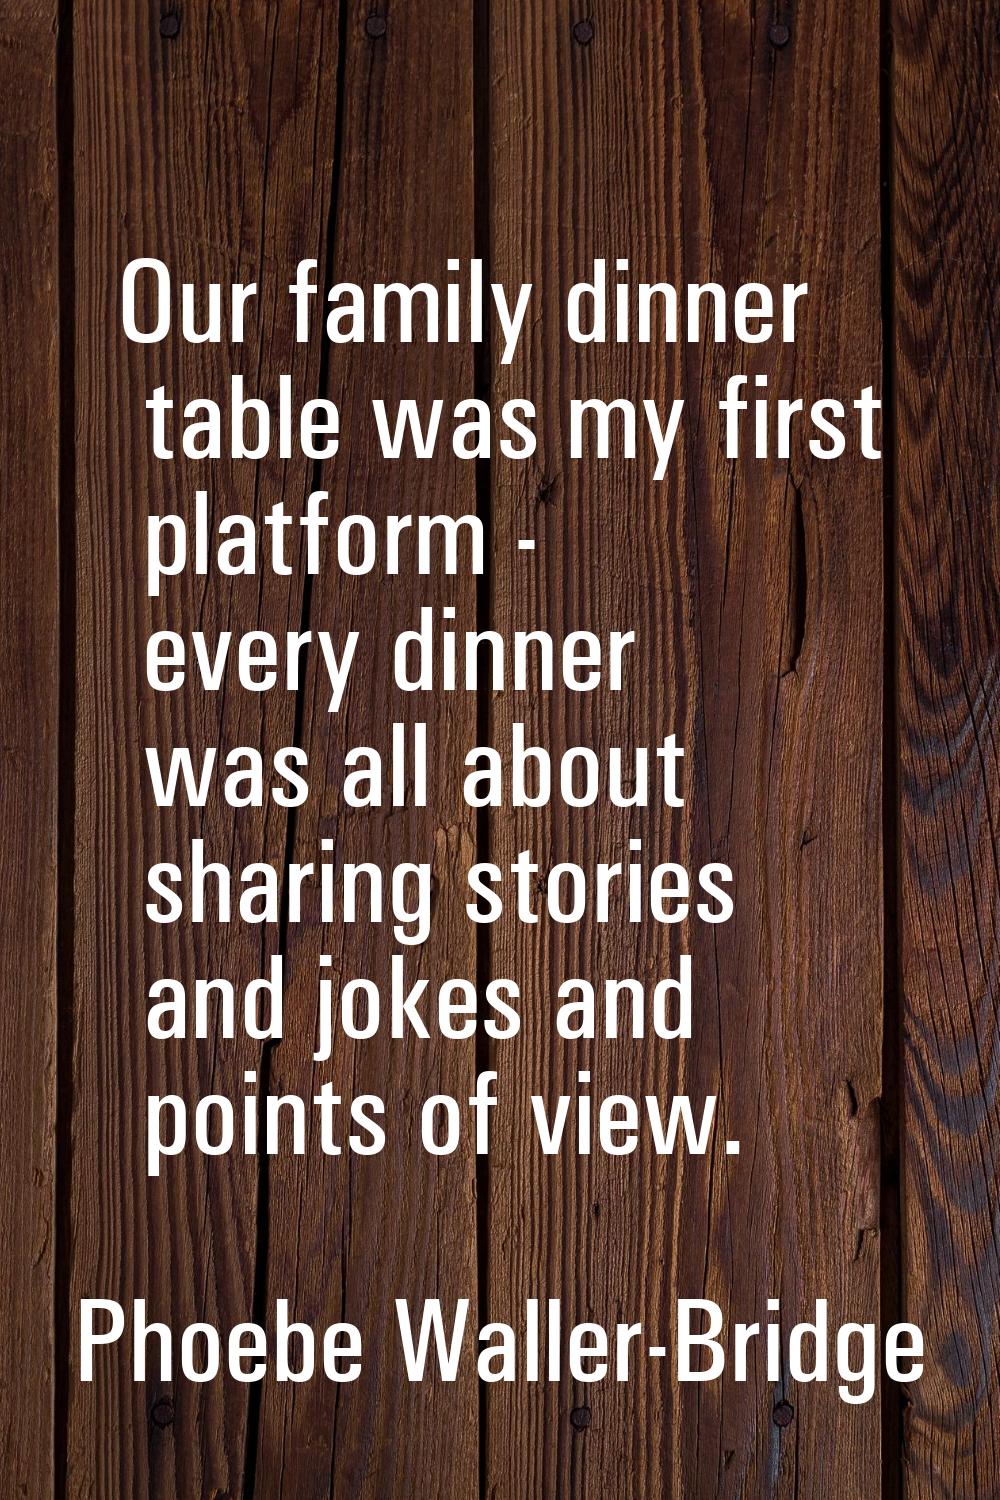 Our family dinner table was my first platform - every dinner was all about sharing stories and joke